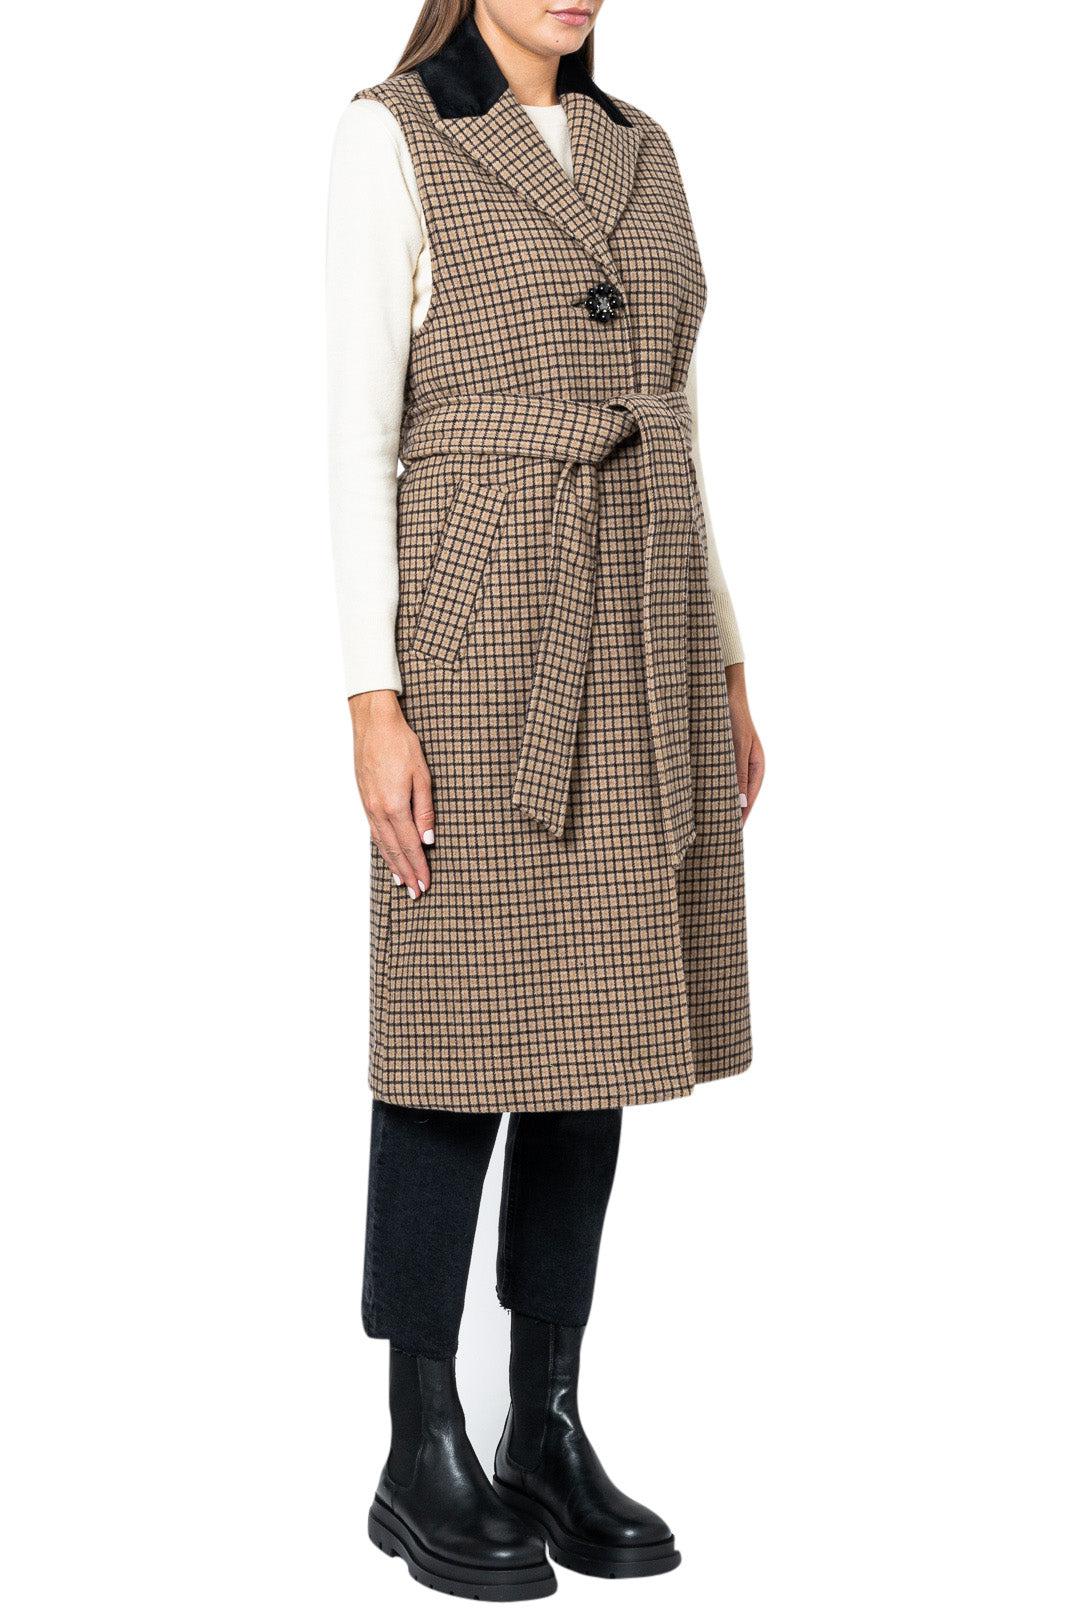 Custommade-Sleeveless check trench coat-213549807-dgallerystore